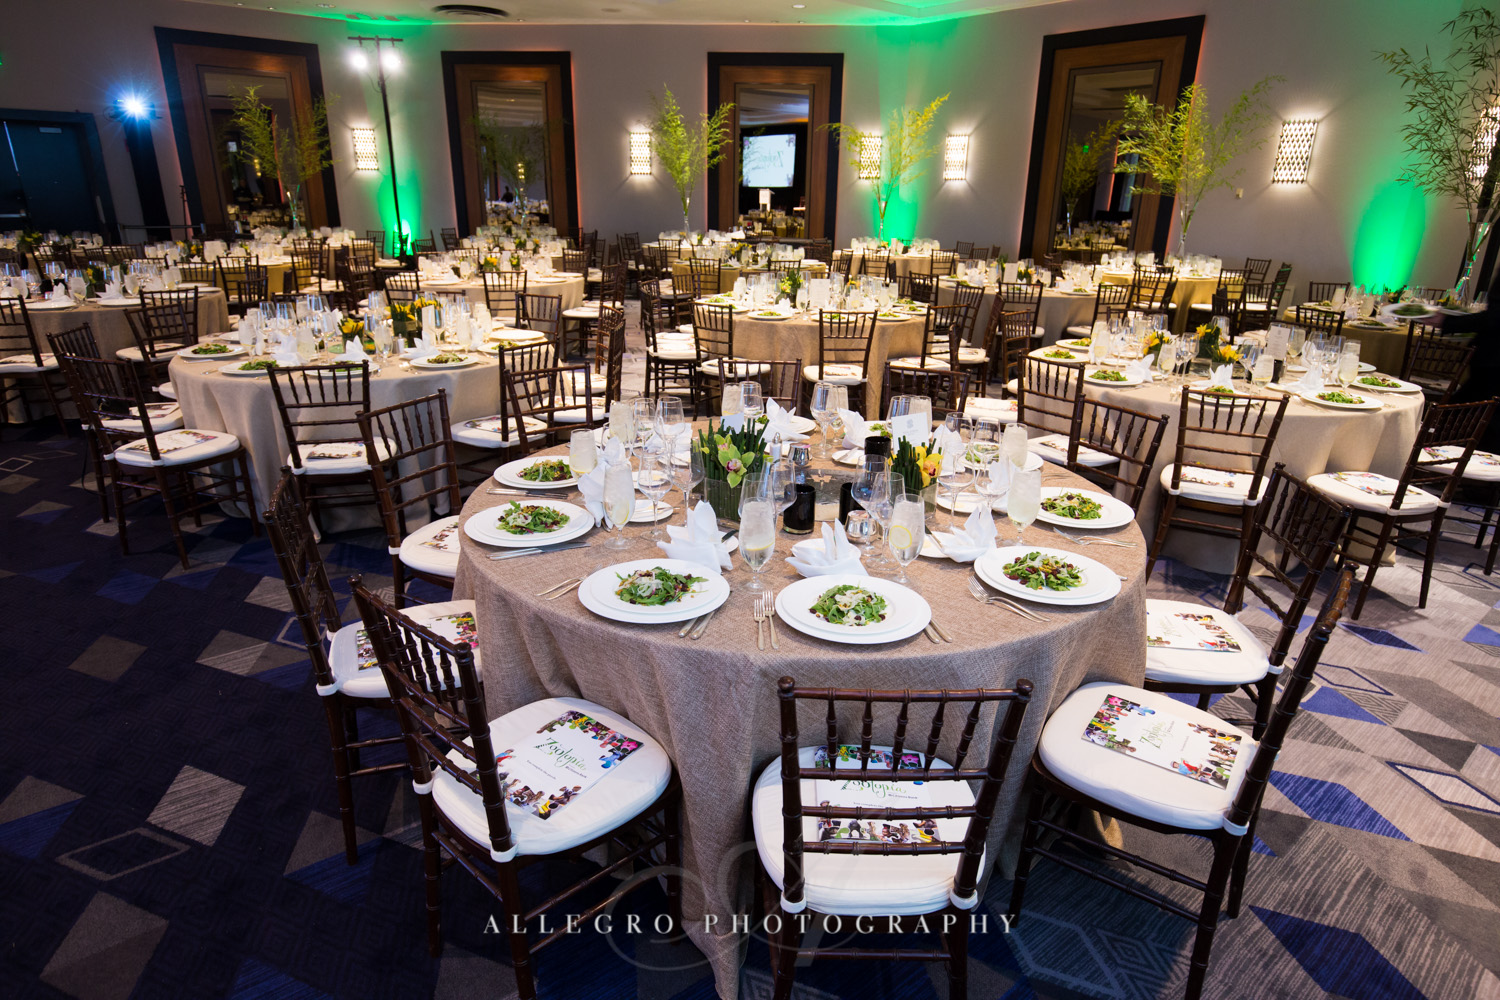 ae events boston - photographed by allegro photography